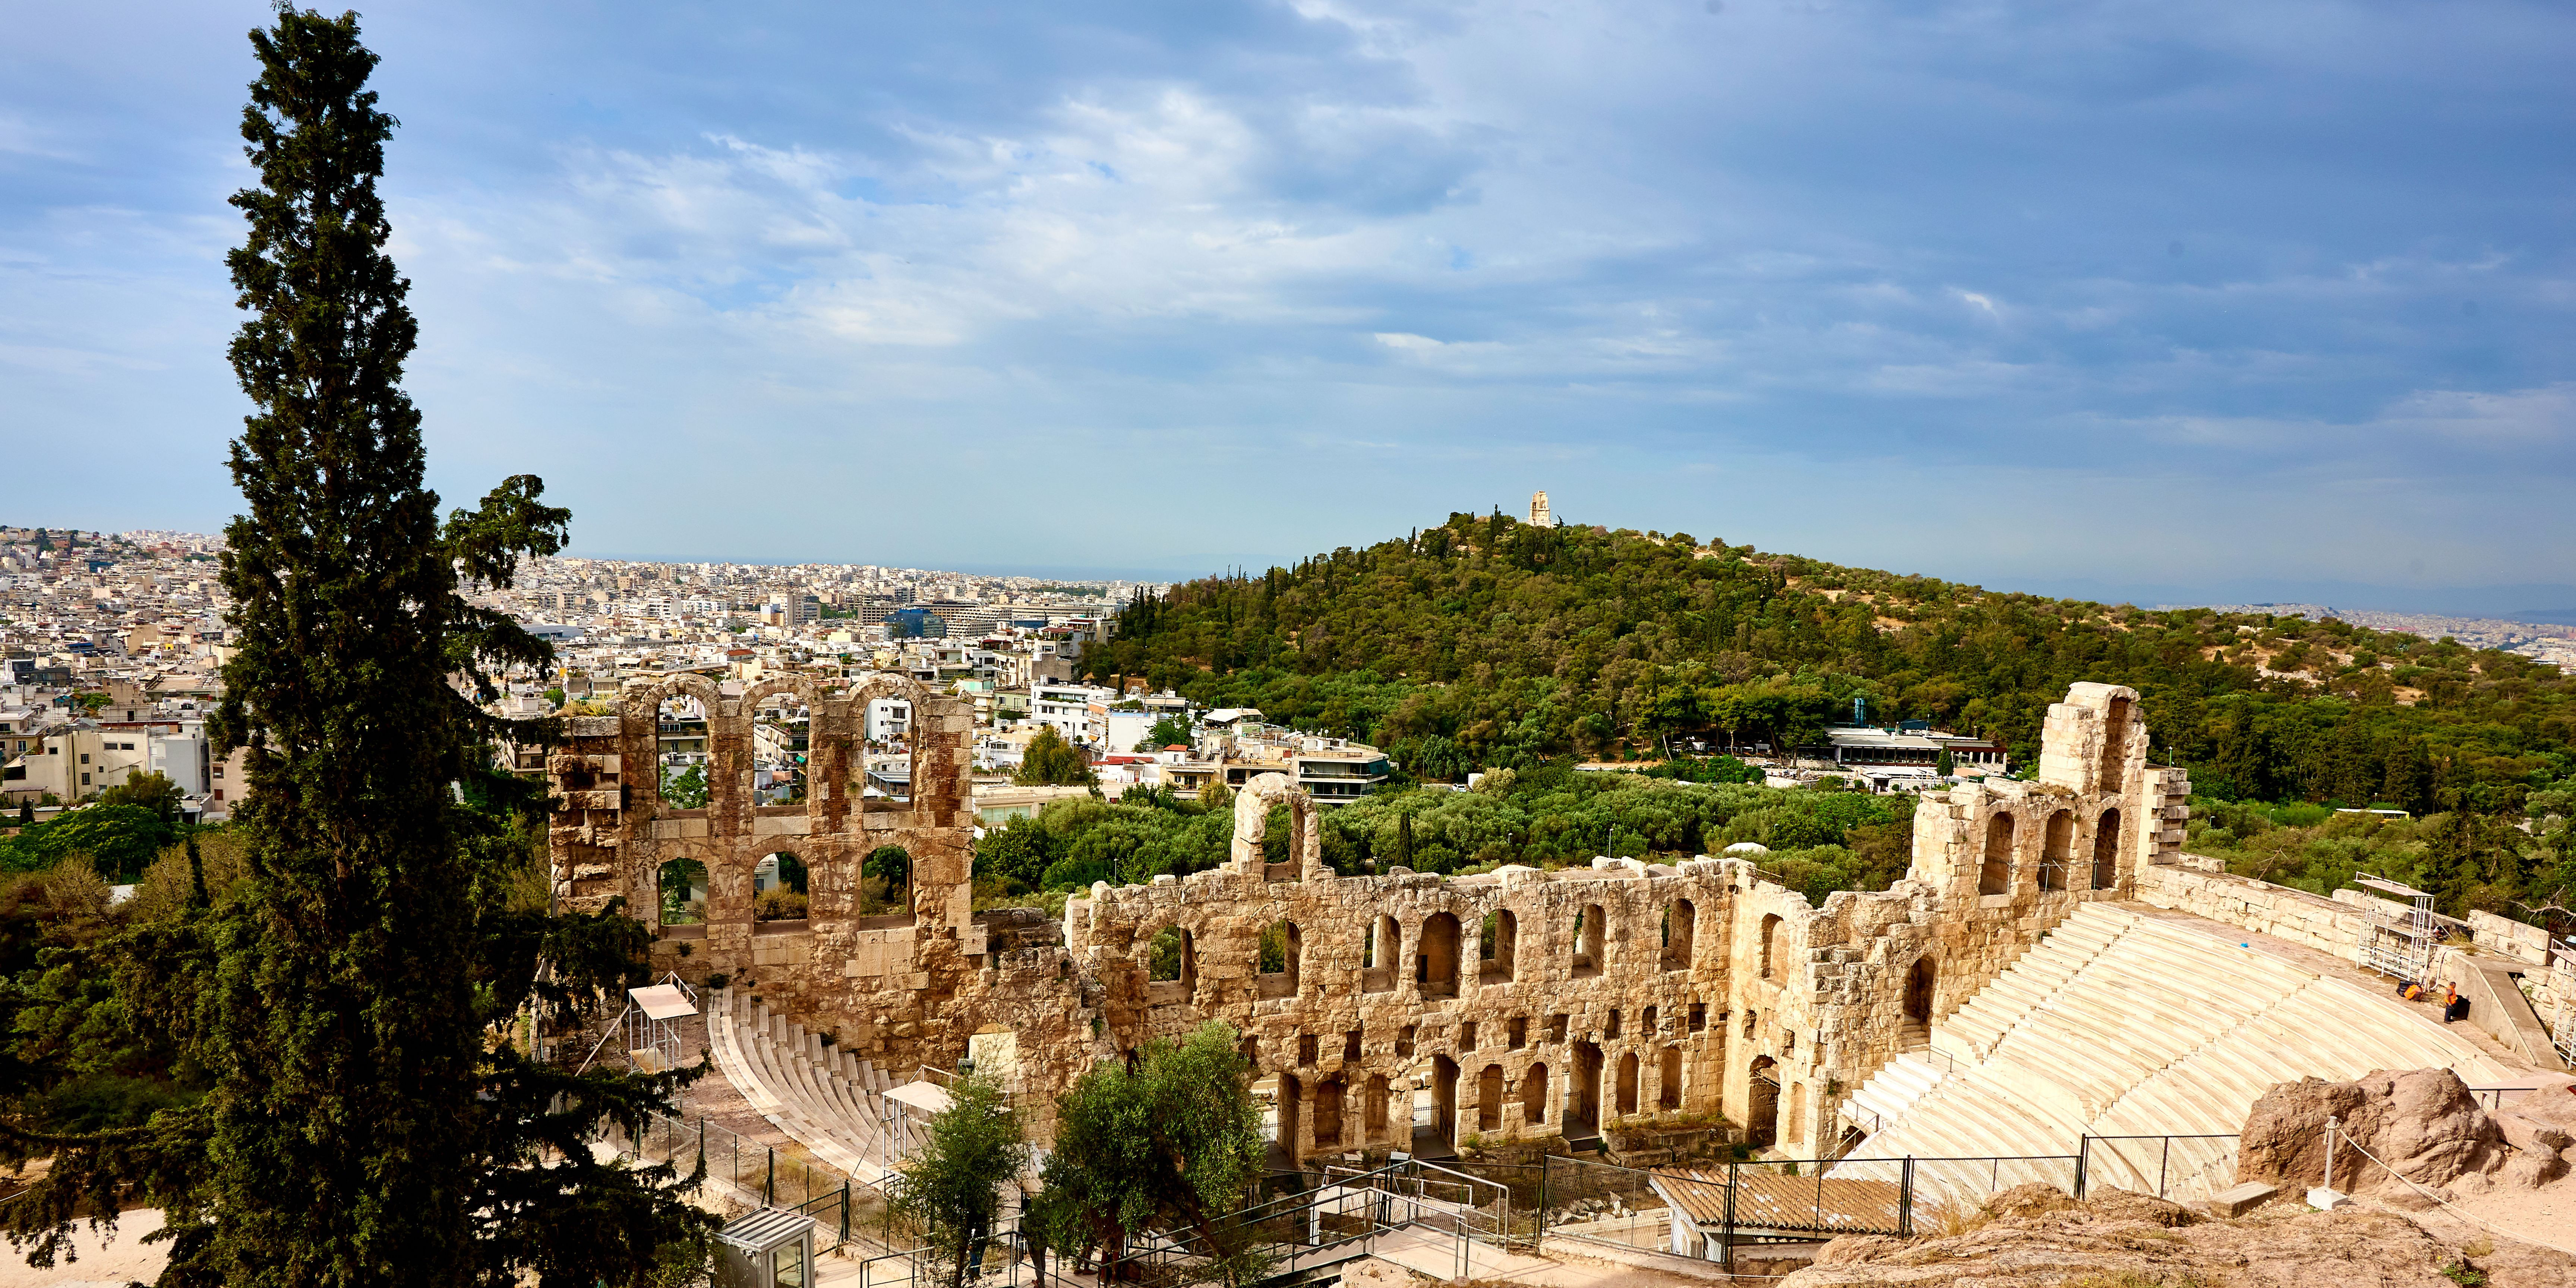 The Odeon of Herodes Atticus theater with the cityscape of Athens in the background.